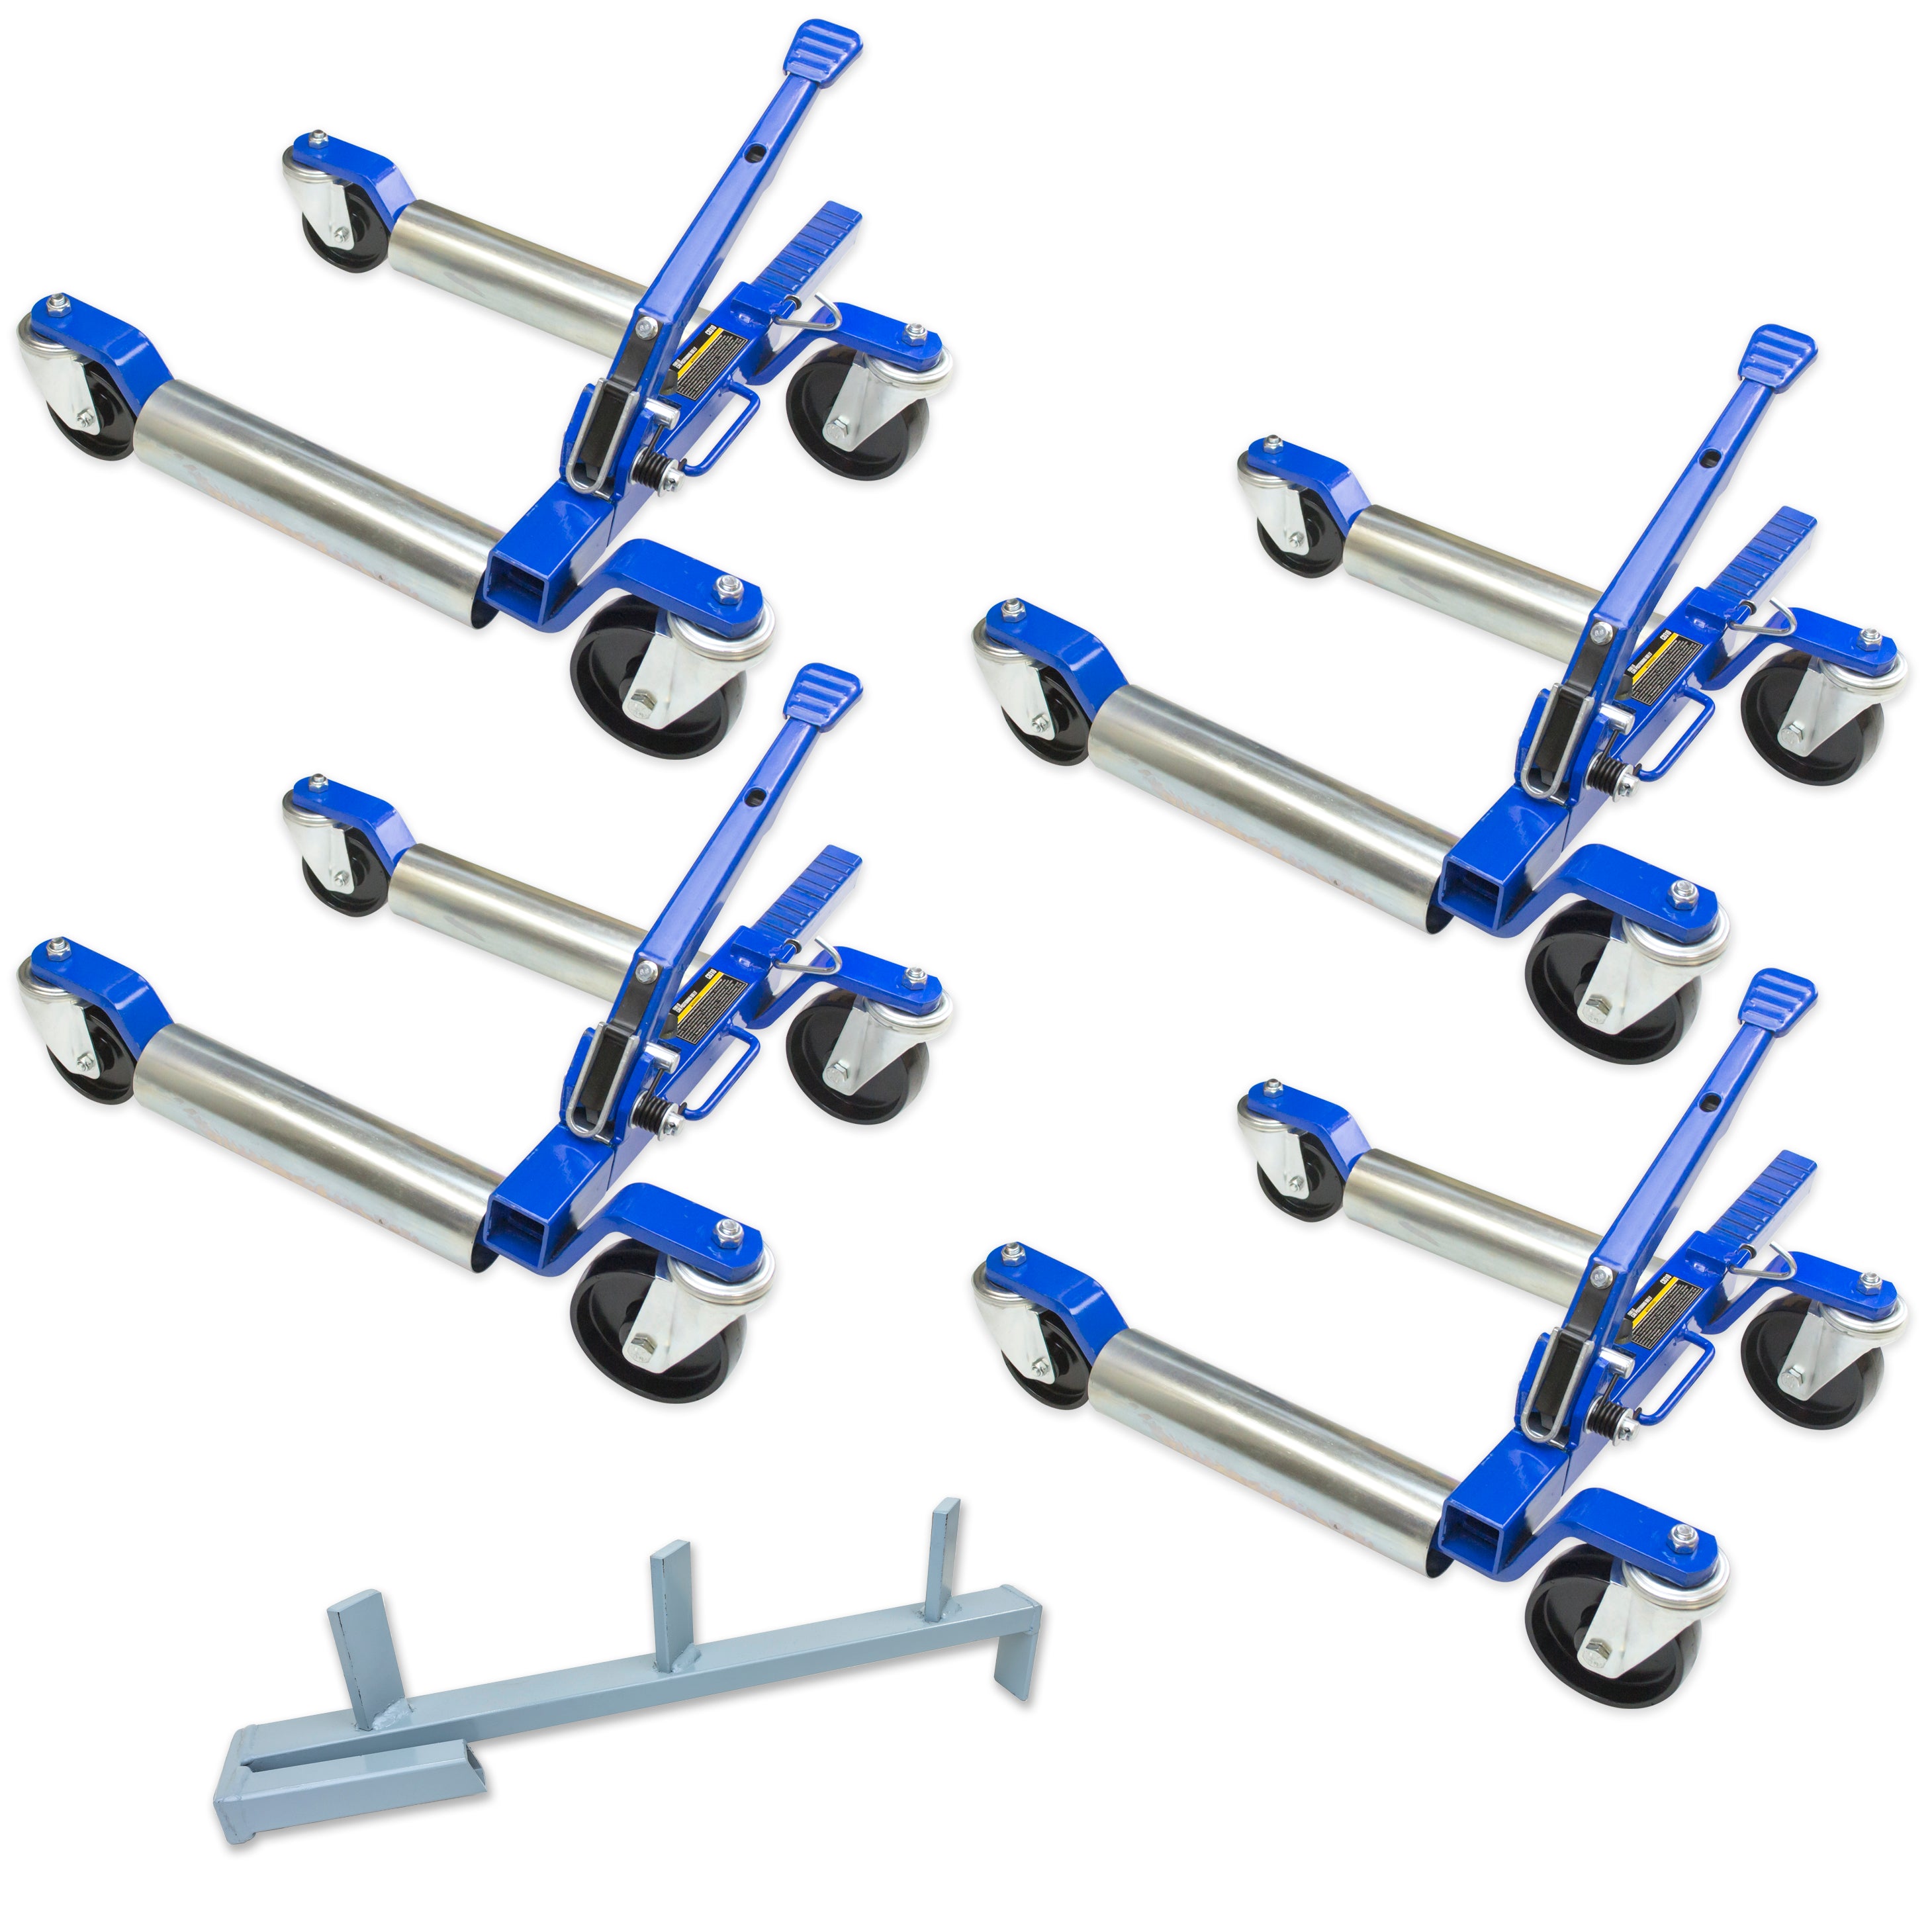 Jackco 1500 LB 12.5” Wheel Car Positioning Dolly (4 Pack with Stand)